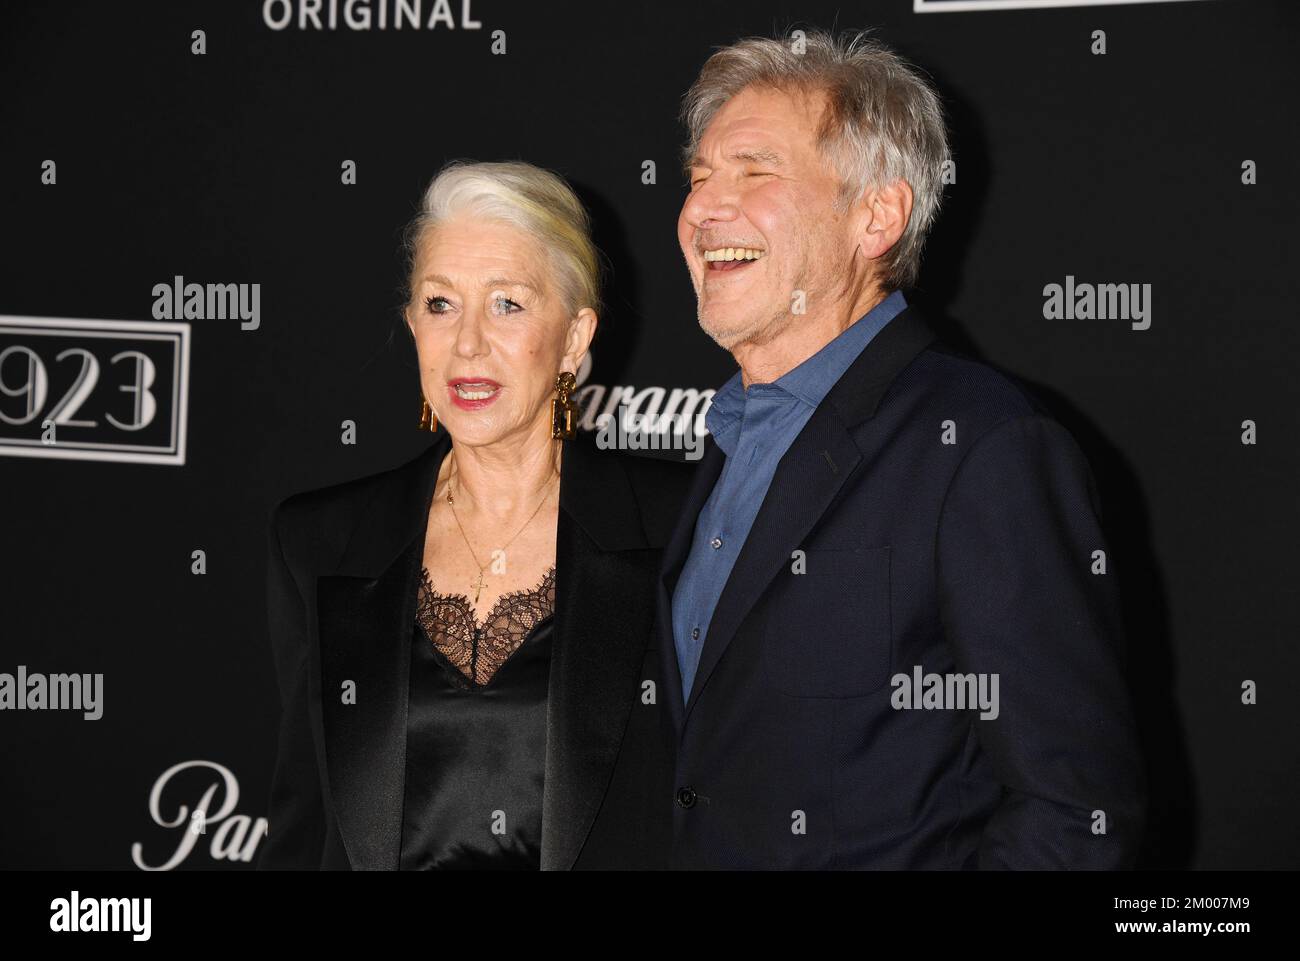 LOS ANGELES, CALIFORNIA - DECEMBER 02: (L-R) Helen Mirren and Harrison Ford attend the Los Angeles Premiere Of Paramount+'s '1923' at Hollywood Americ Stock Photo